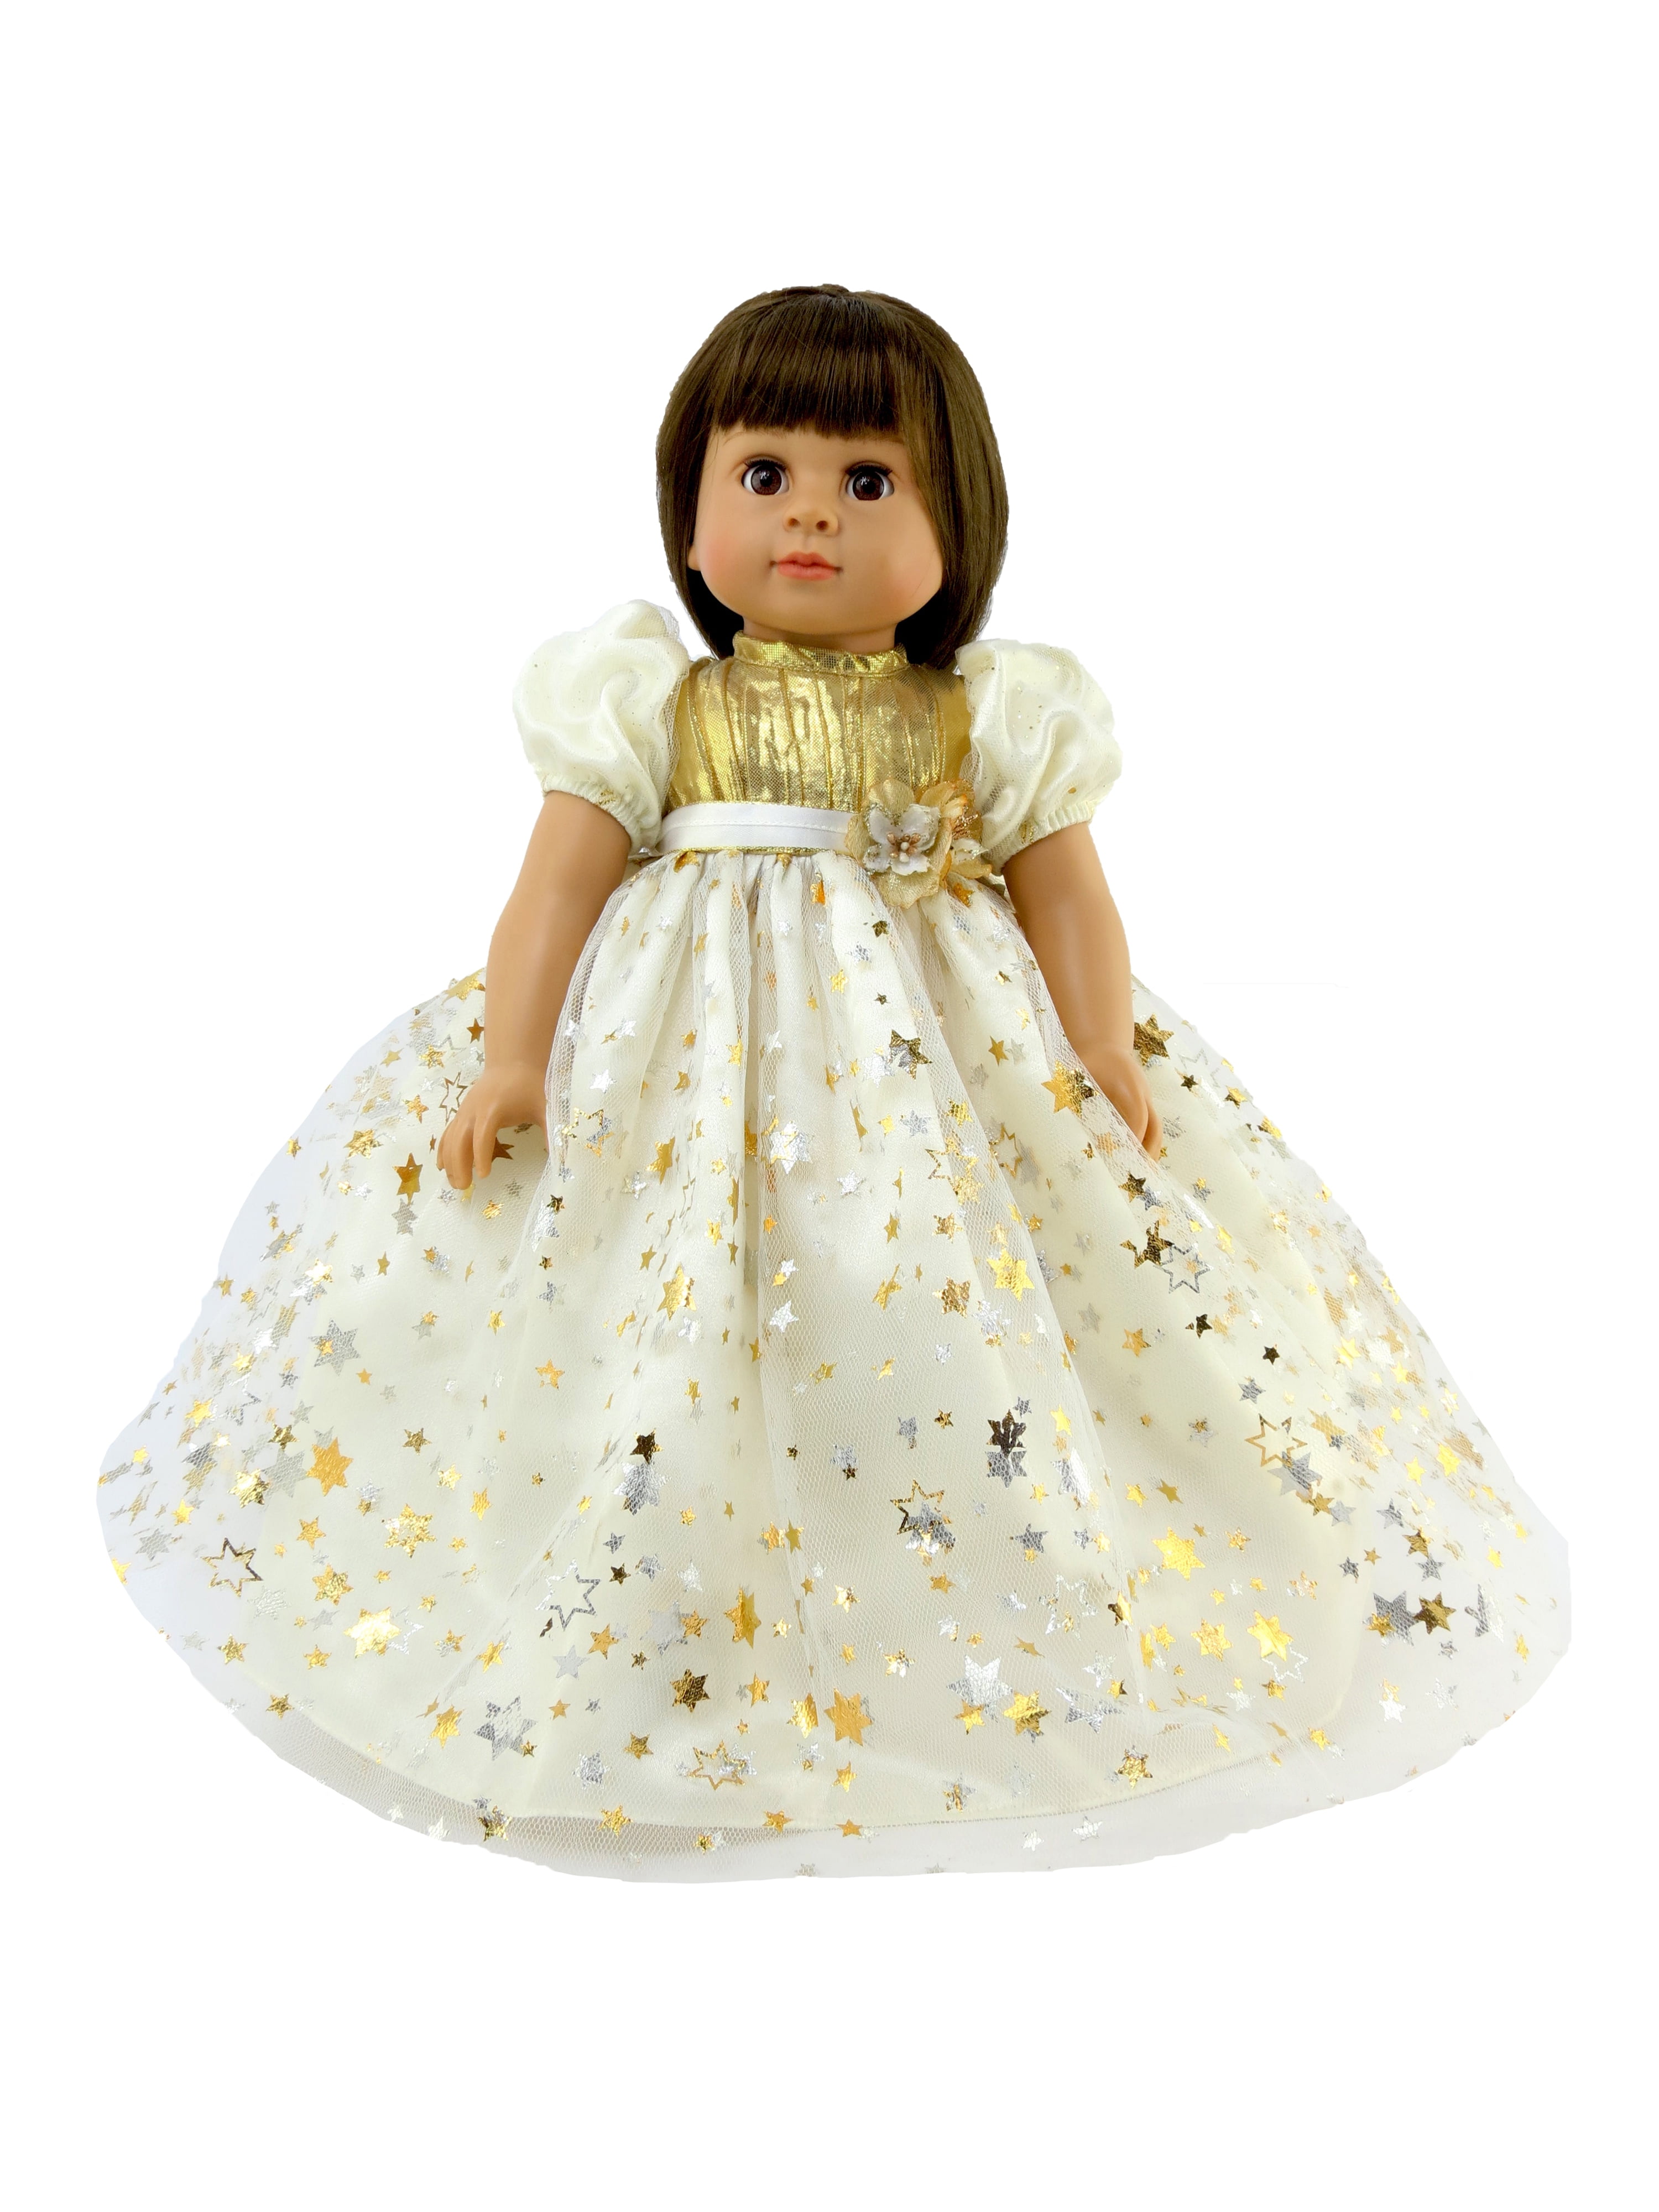 Doll Dress For 18 Doll or American Girl.